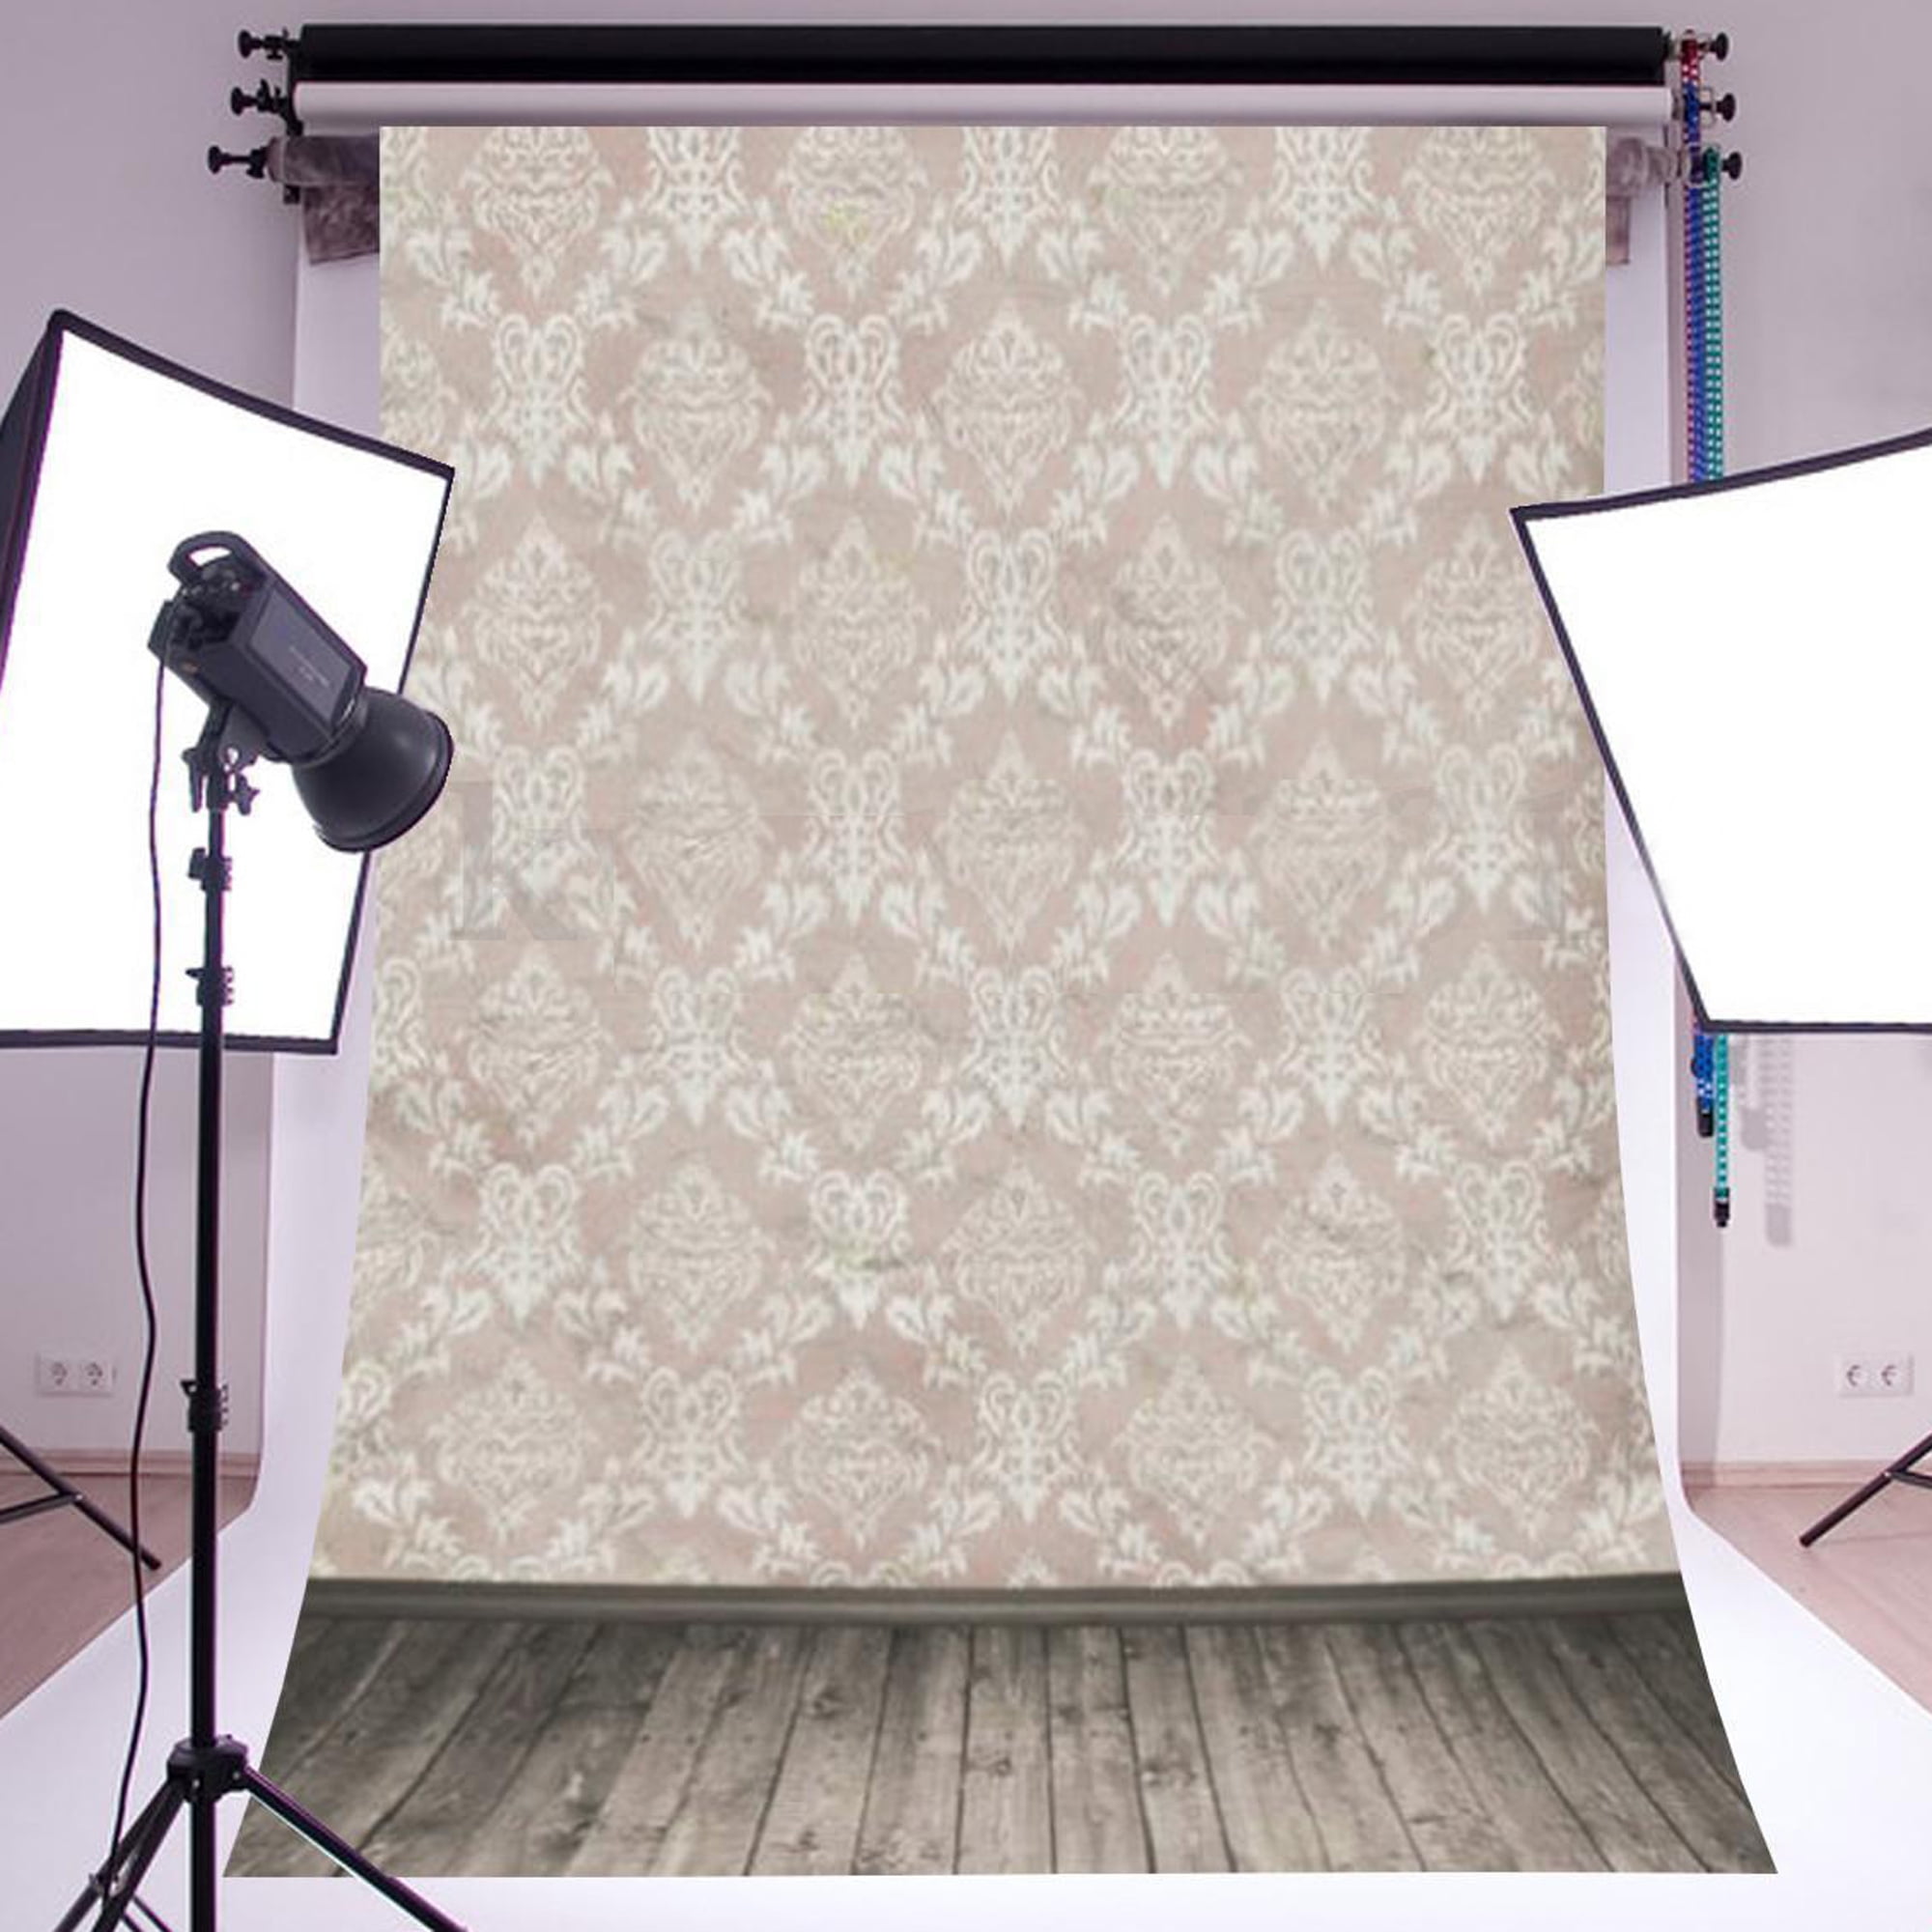 Business Use Photography Backdrop 4.9 x 7.2 Feet Party Tropical Beach Background Wedding Photo Booth Great for Studio